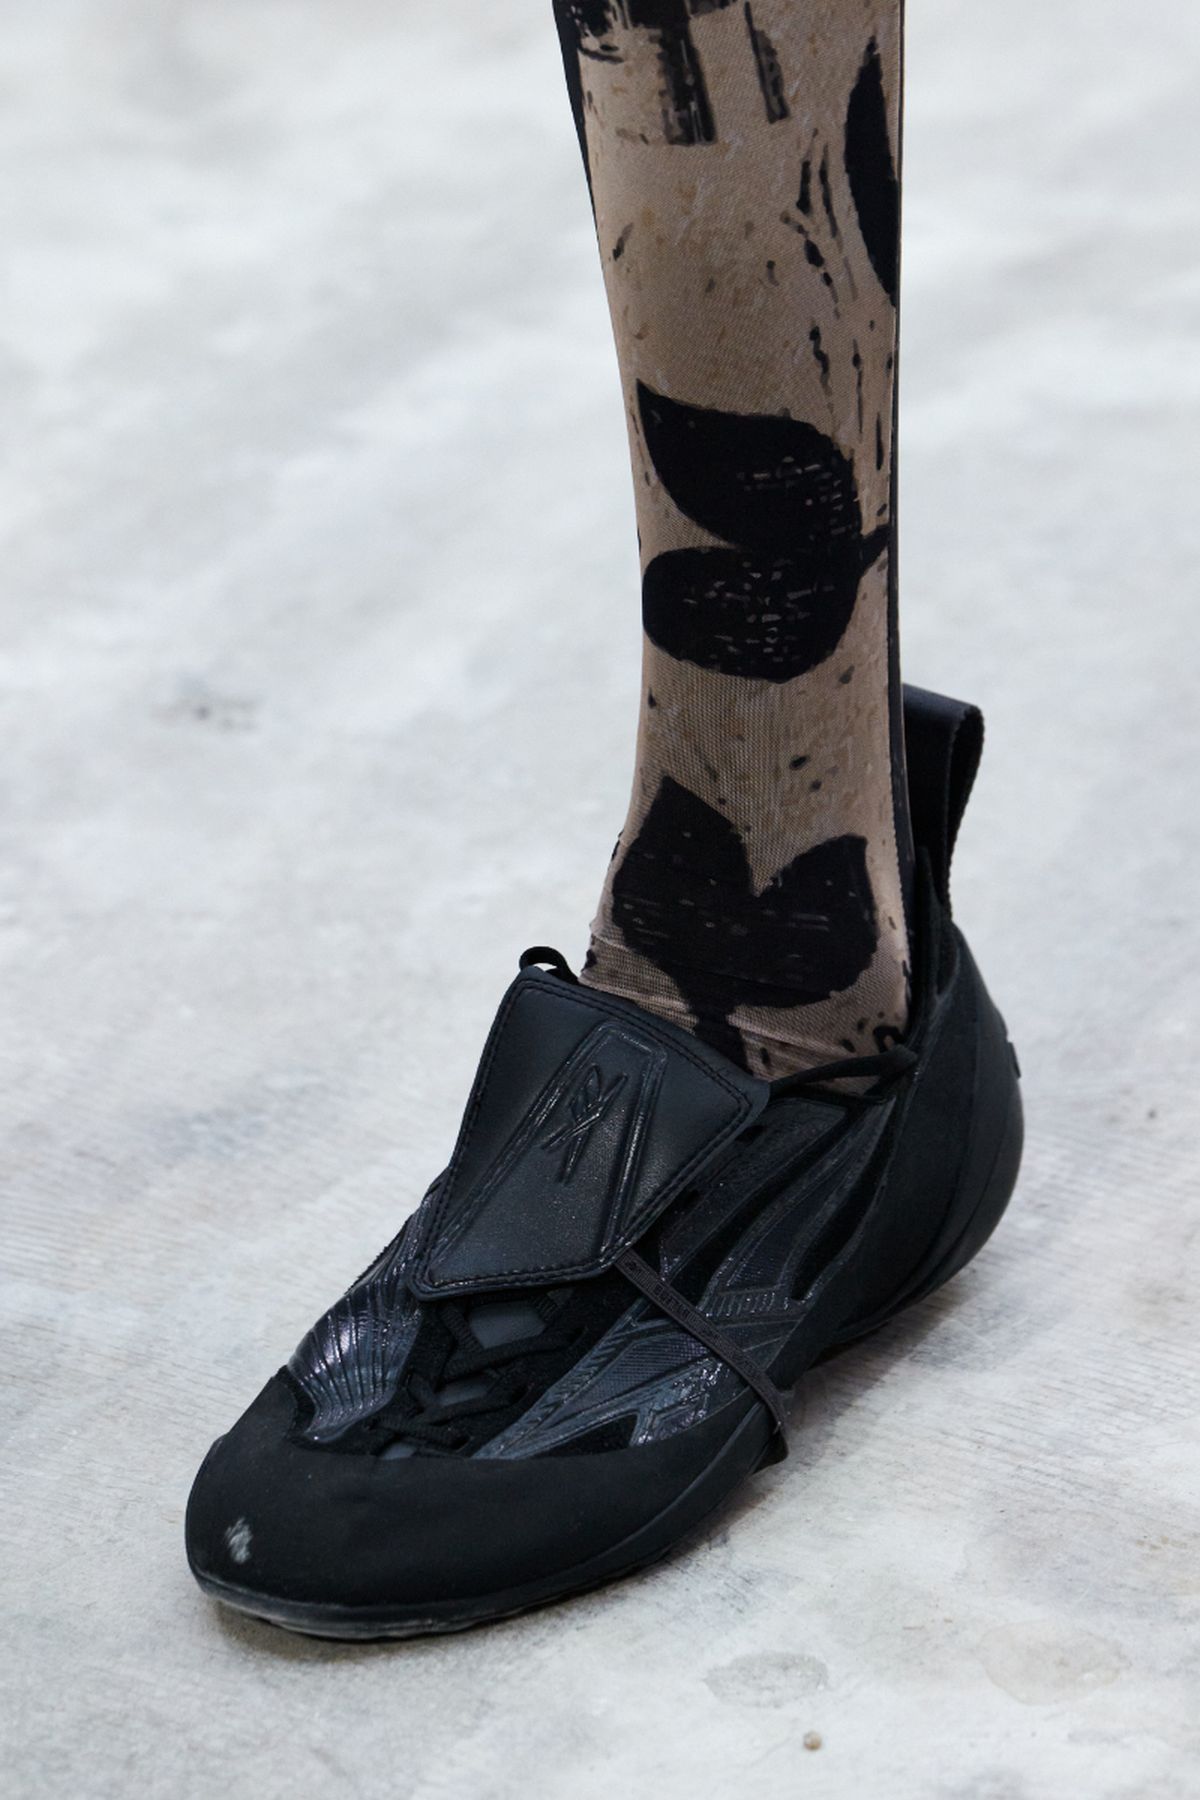 Reebok x BOTTER Brings The Weird And Wonderful To PFW